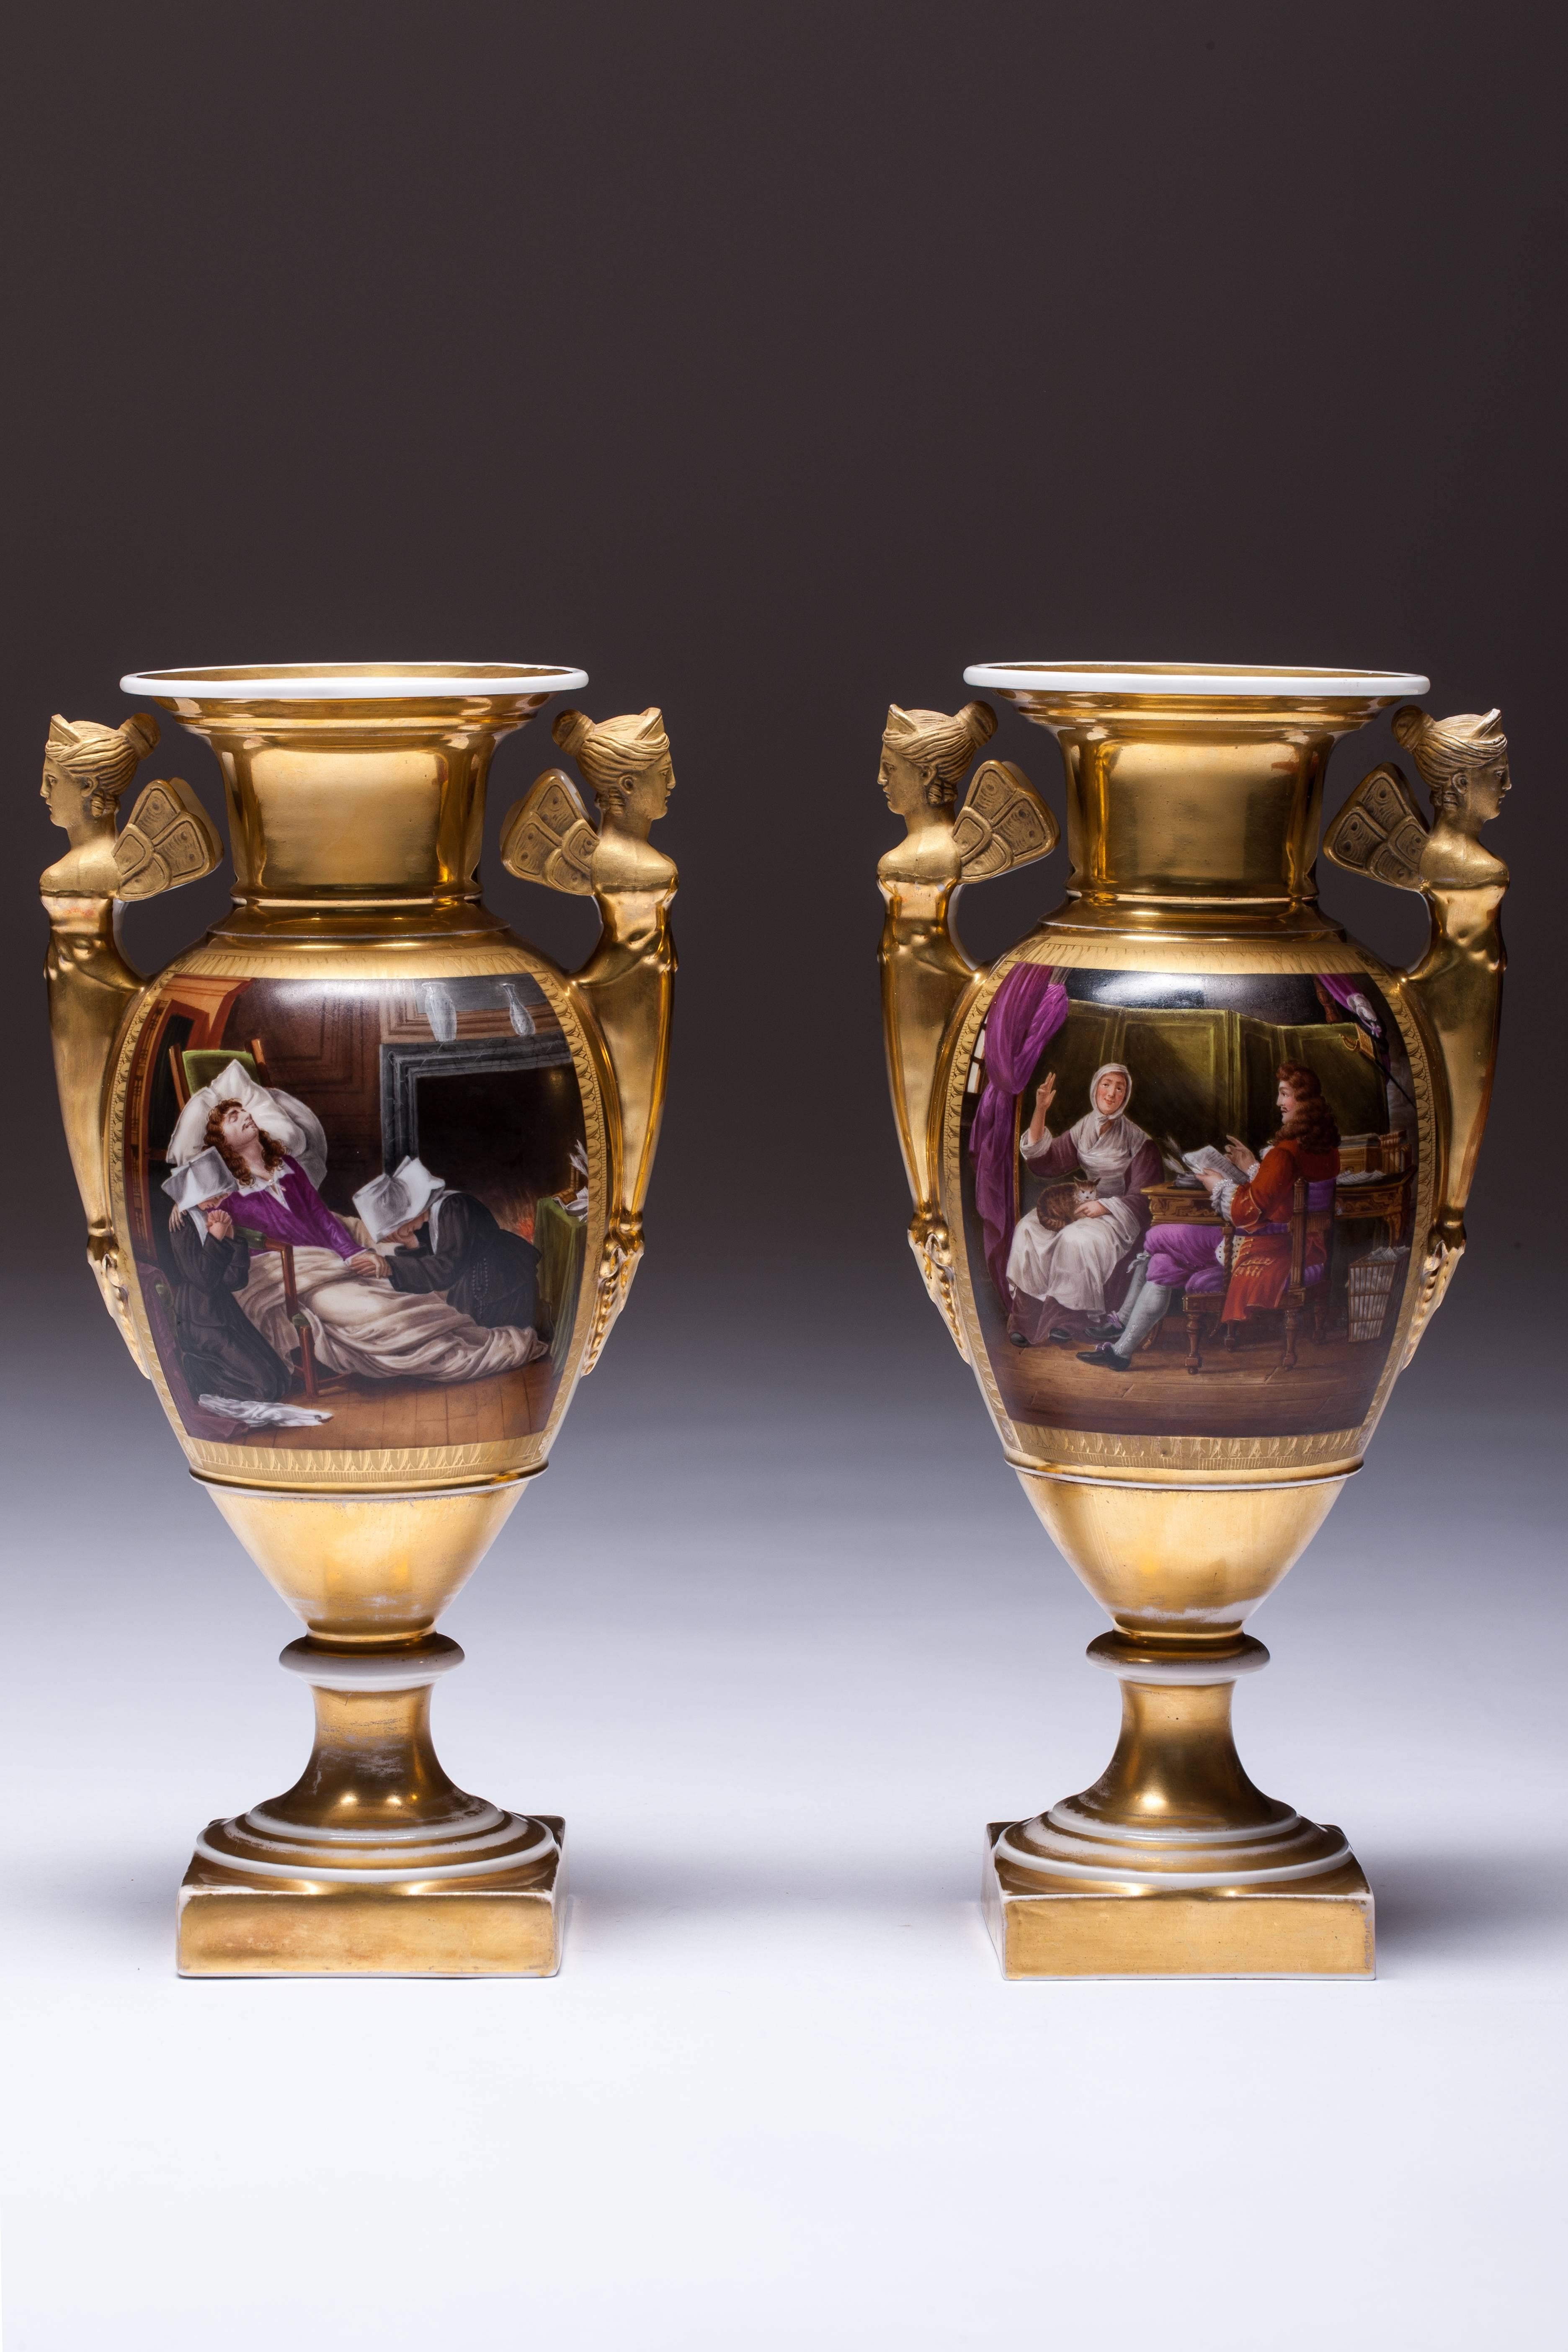 One scene decorated with a vase, in which the nurses are crying because of the death of the landlord. Another vase is decorated with woman and landlord who reads her rows. The other side of the vase is decorated with musical instruments.
Price per